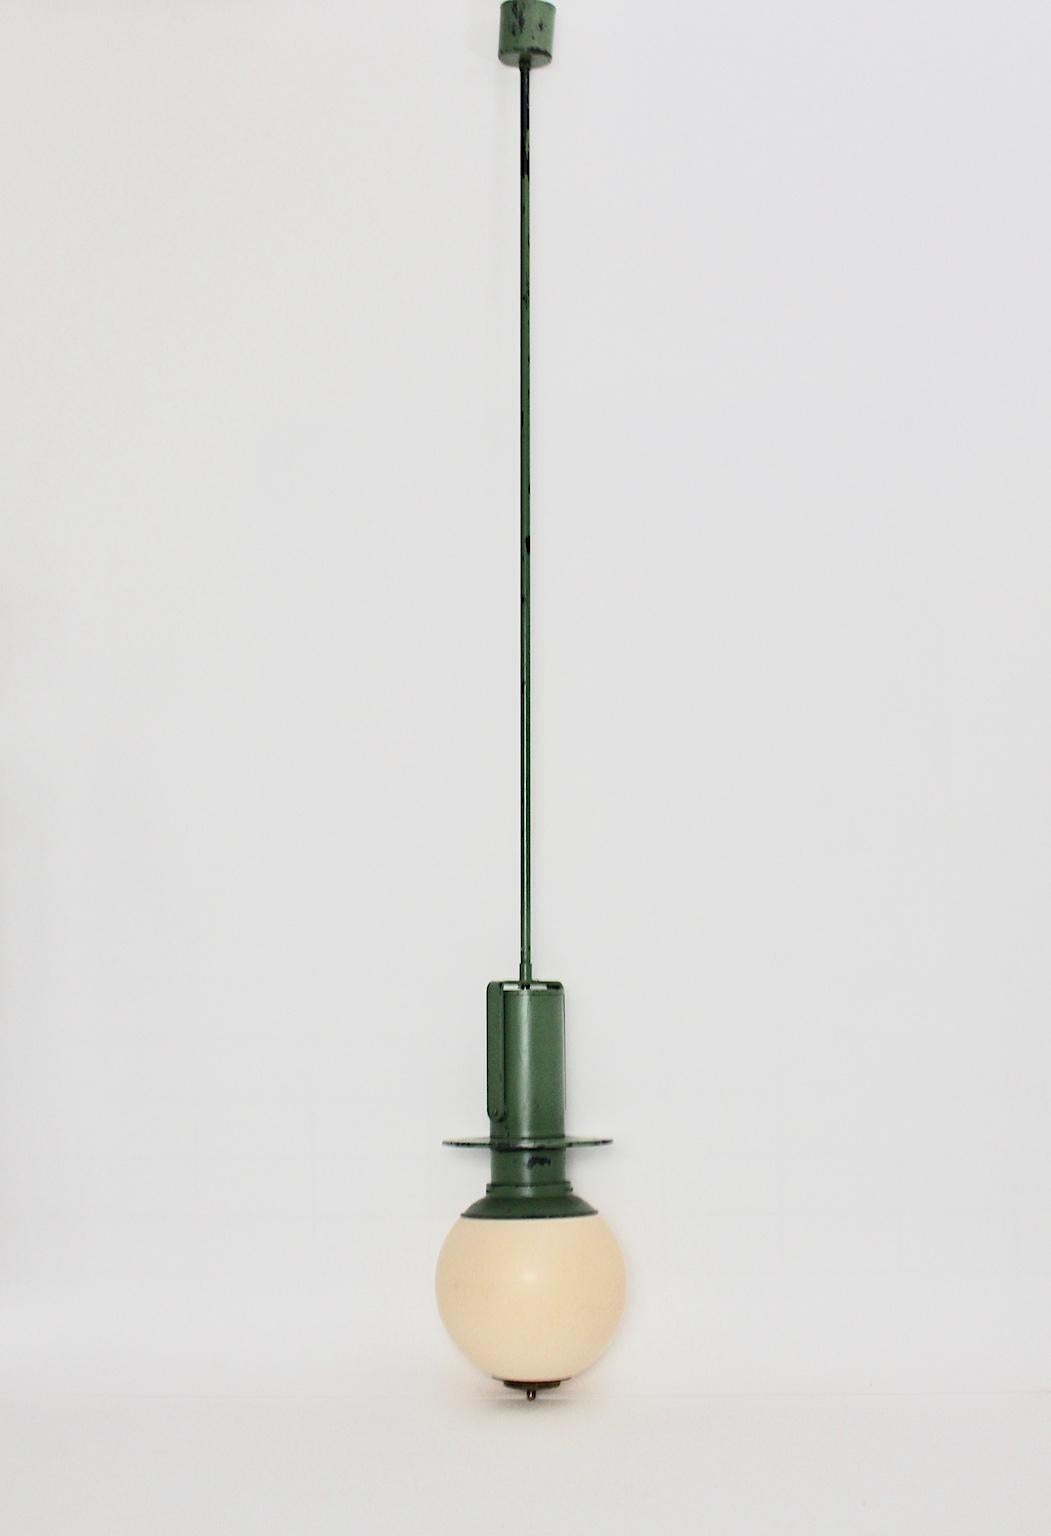 A very rare pendant or hanging lamp by Otto Wagner, Vienna, which was designed for the Viennese Stadtbahn, circa 1898 in Vienna. The hanging lamp was made out of the typical reseda green lacquered metal and brass and a plastic lamp shade with an E